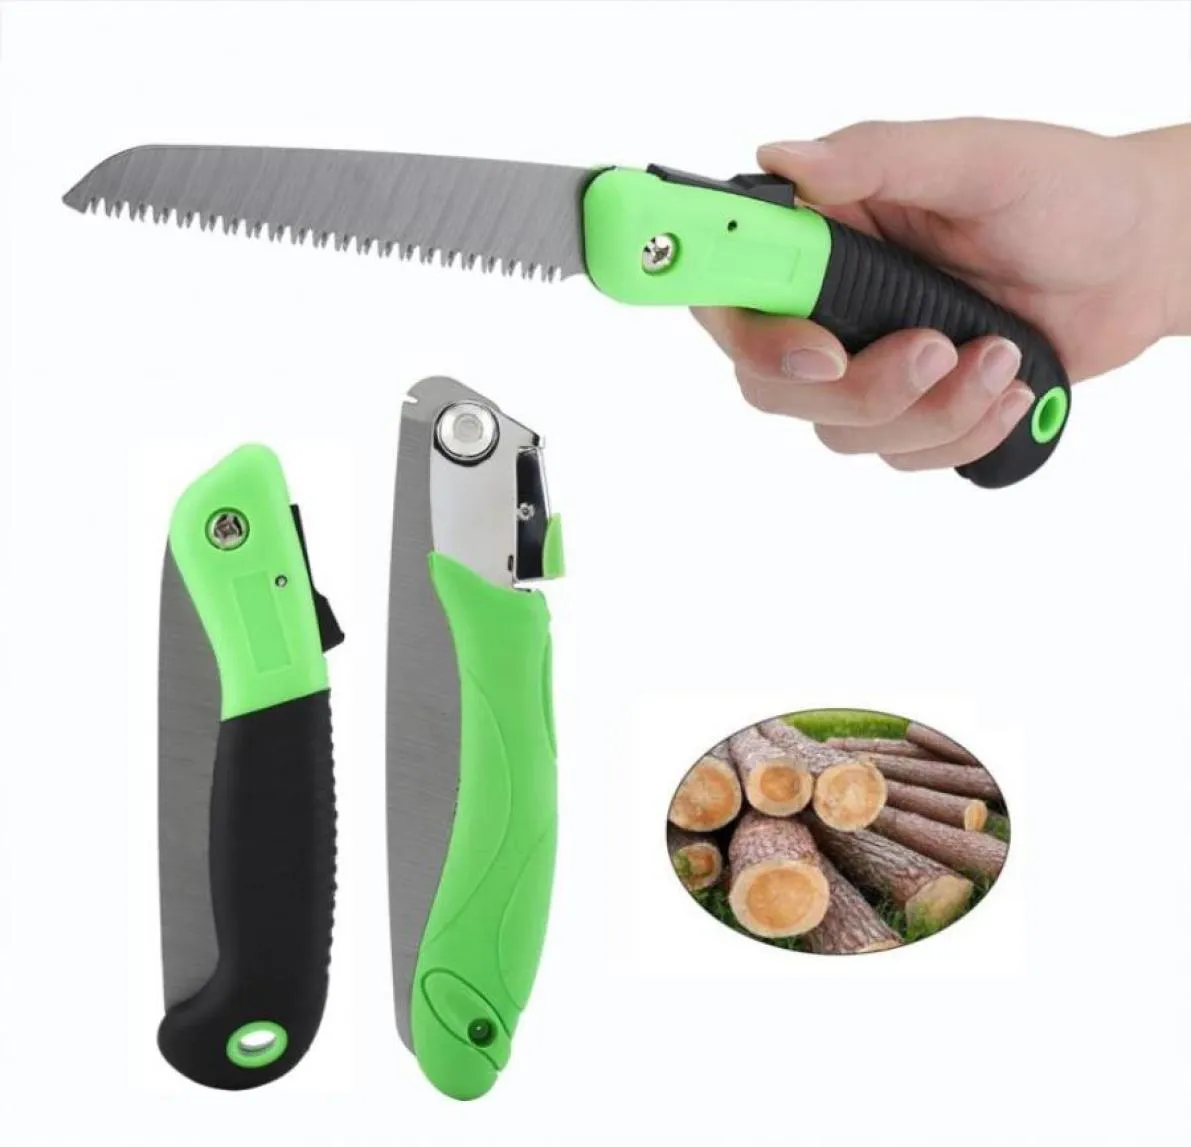 High Quality Garden Saw Mini Portable Folding Camp Saw Trimming Wood Tree Garden Woodworking Hand Saws SteelABS New1643736